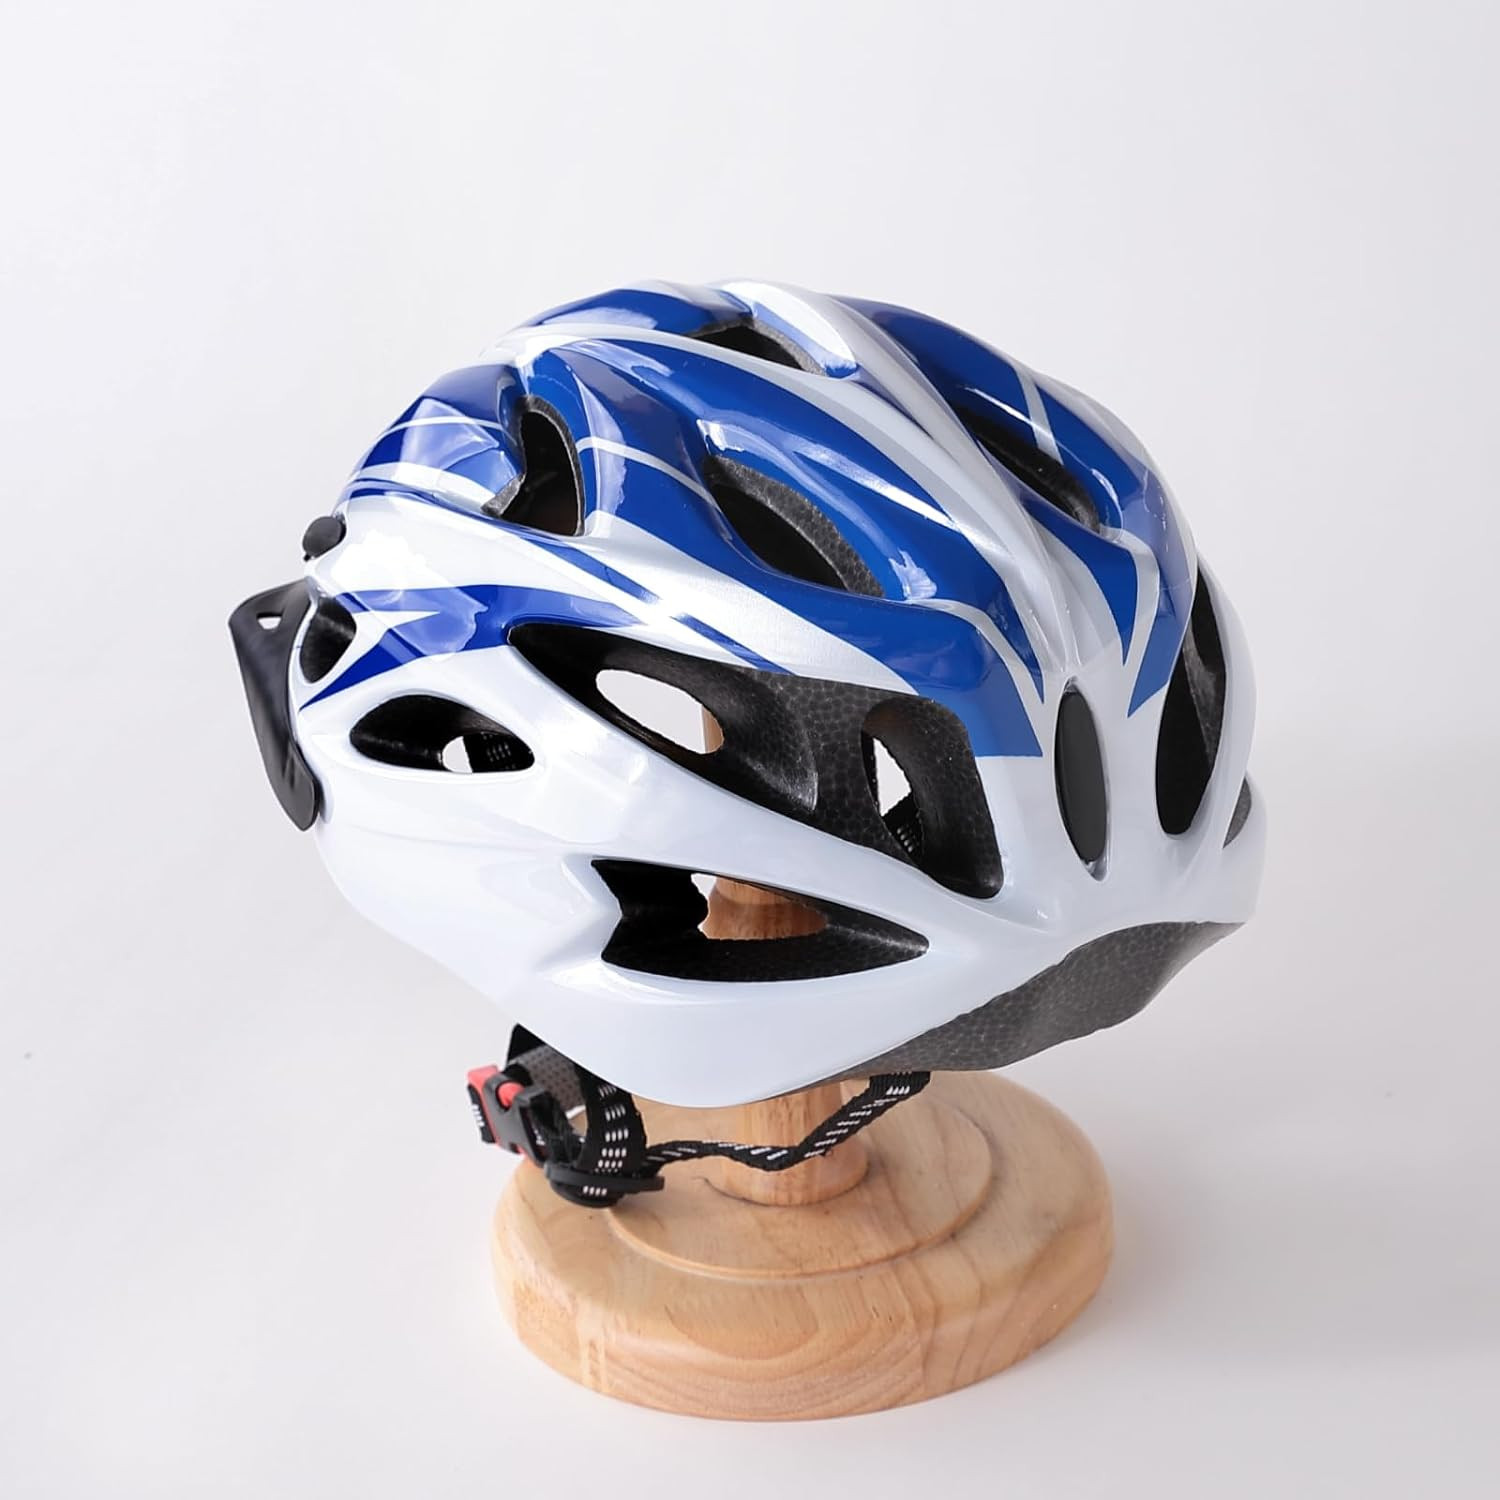 Kuber Industries Cycling Helmet with Detachable Visor|Helmet for Mountain, Road Bike & Skating|Breathable & Adjustable Bicycle Helmet|Ideal for Adults and Kids (Blue & White)